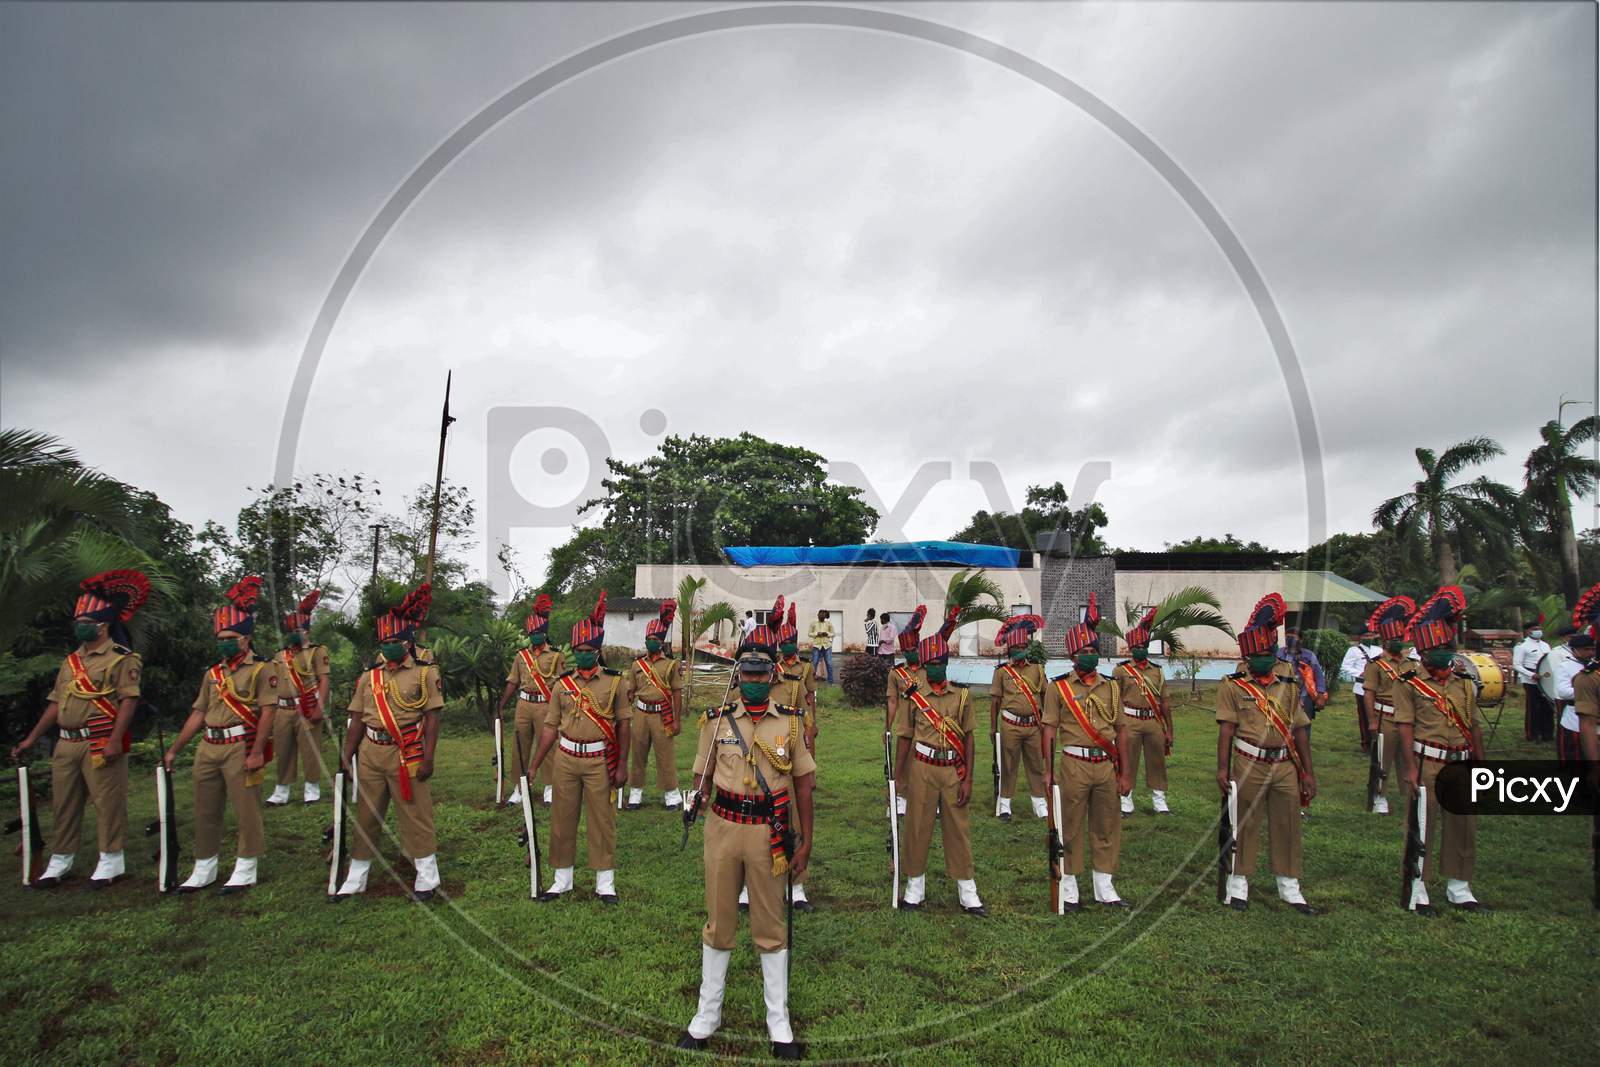 Policemen stand in a line during a flag hoisting function for Independence Day celebrations in Mumbai, India on August 15, 2020.